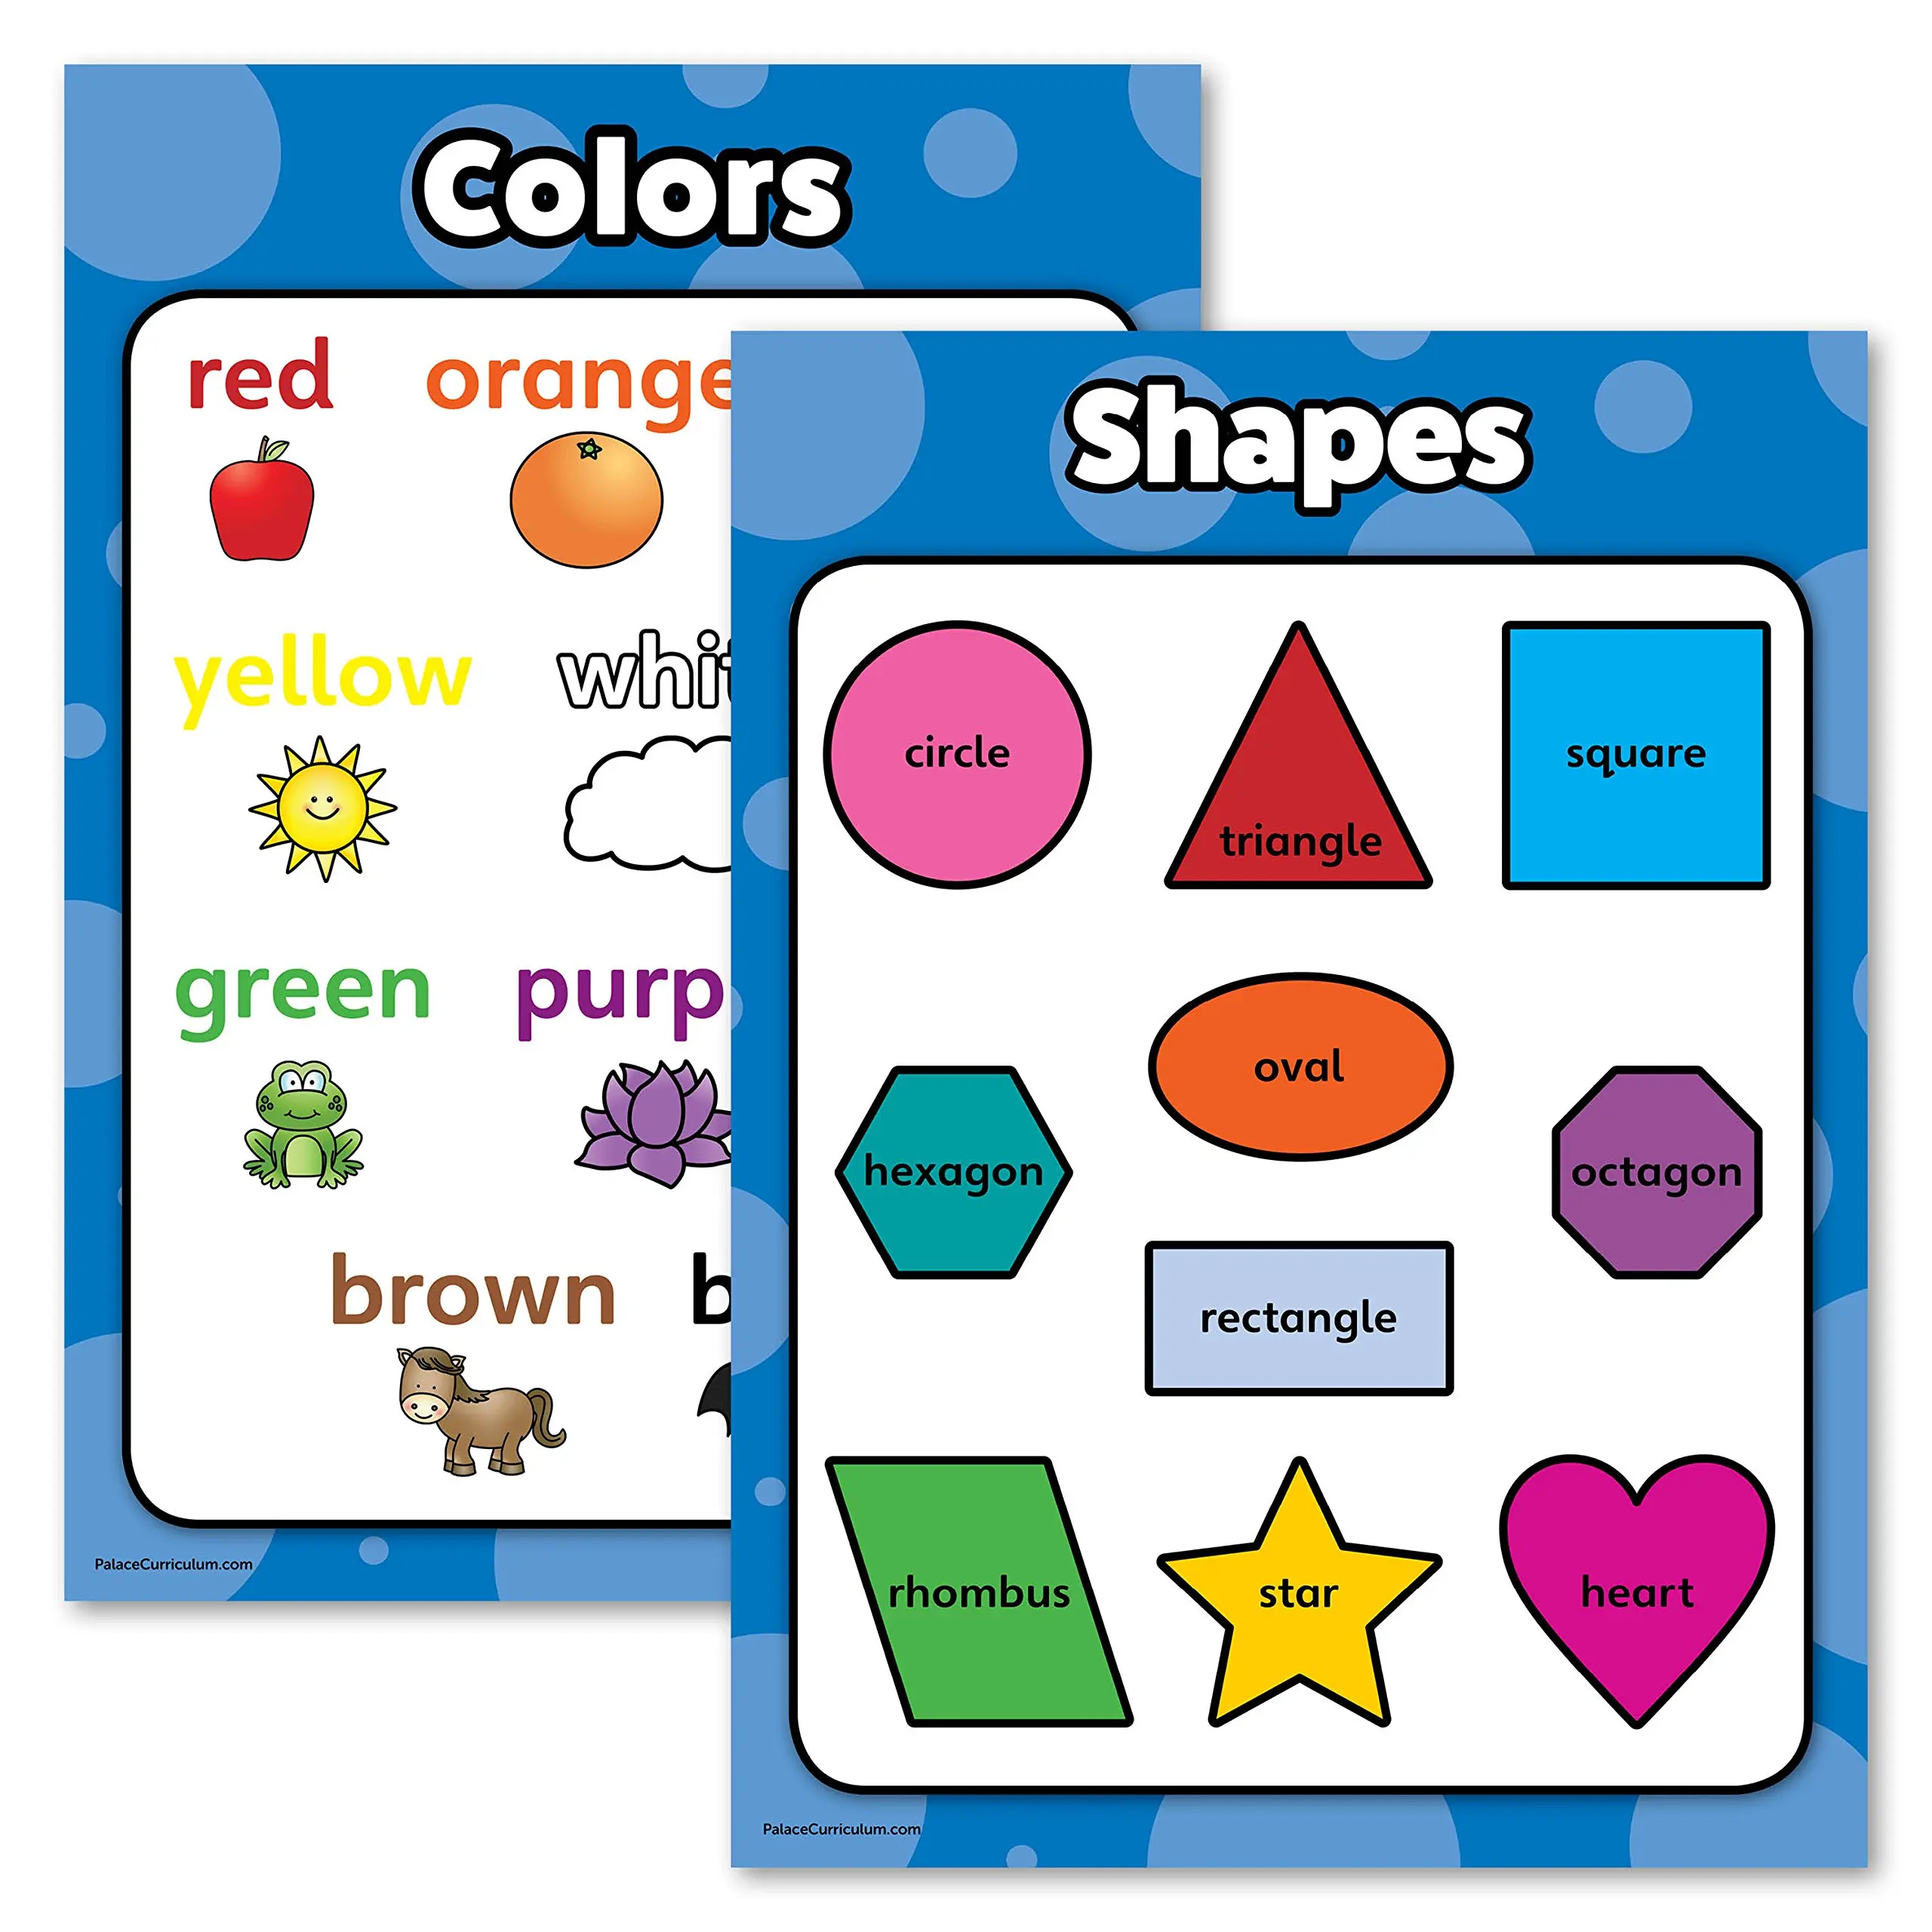 Cheap Shapes Poster Printable, find Shapes Poster Printable deals on